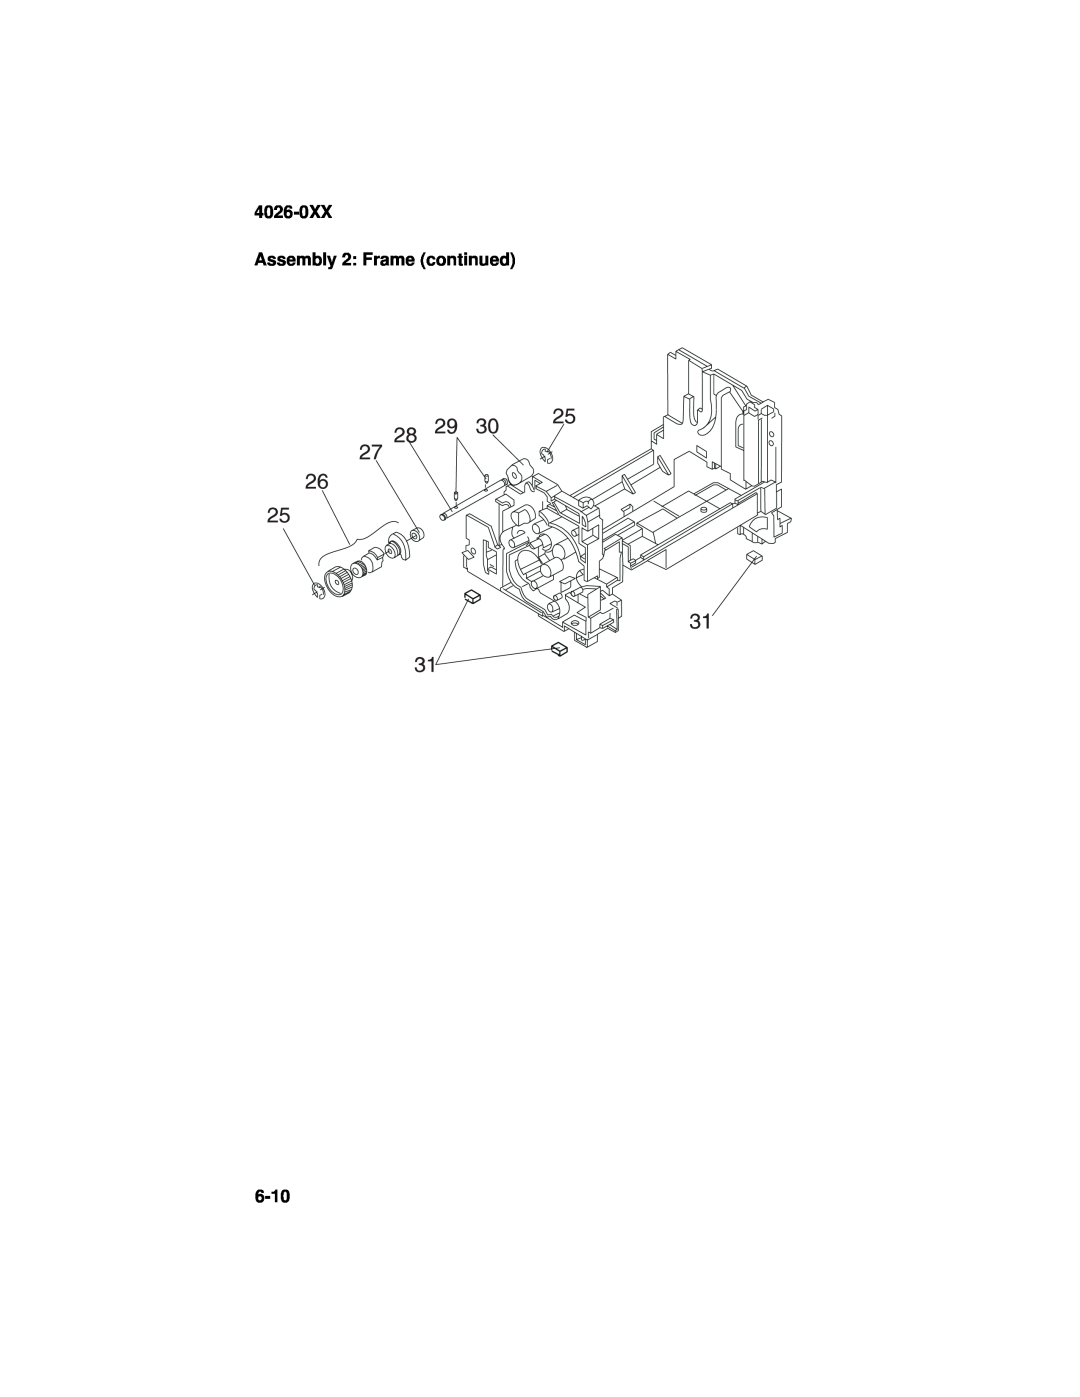 Lexmark manual 6-10, 4026-0XX Assembly 2: Frame continued 